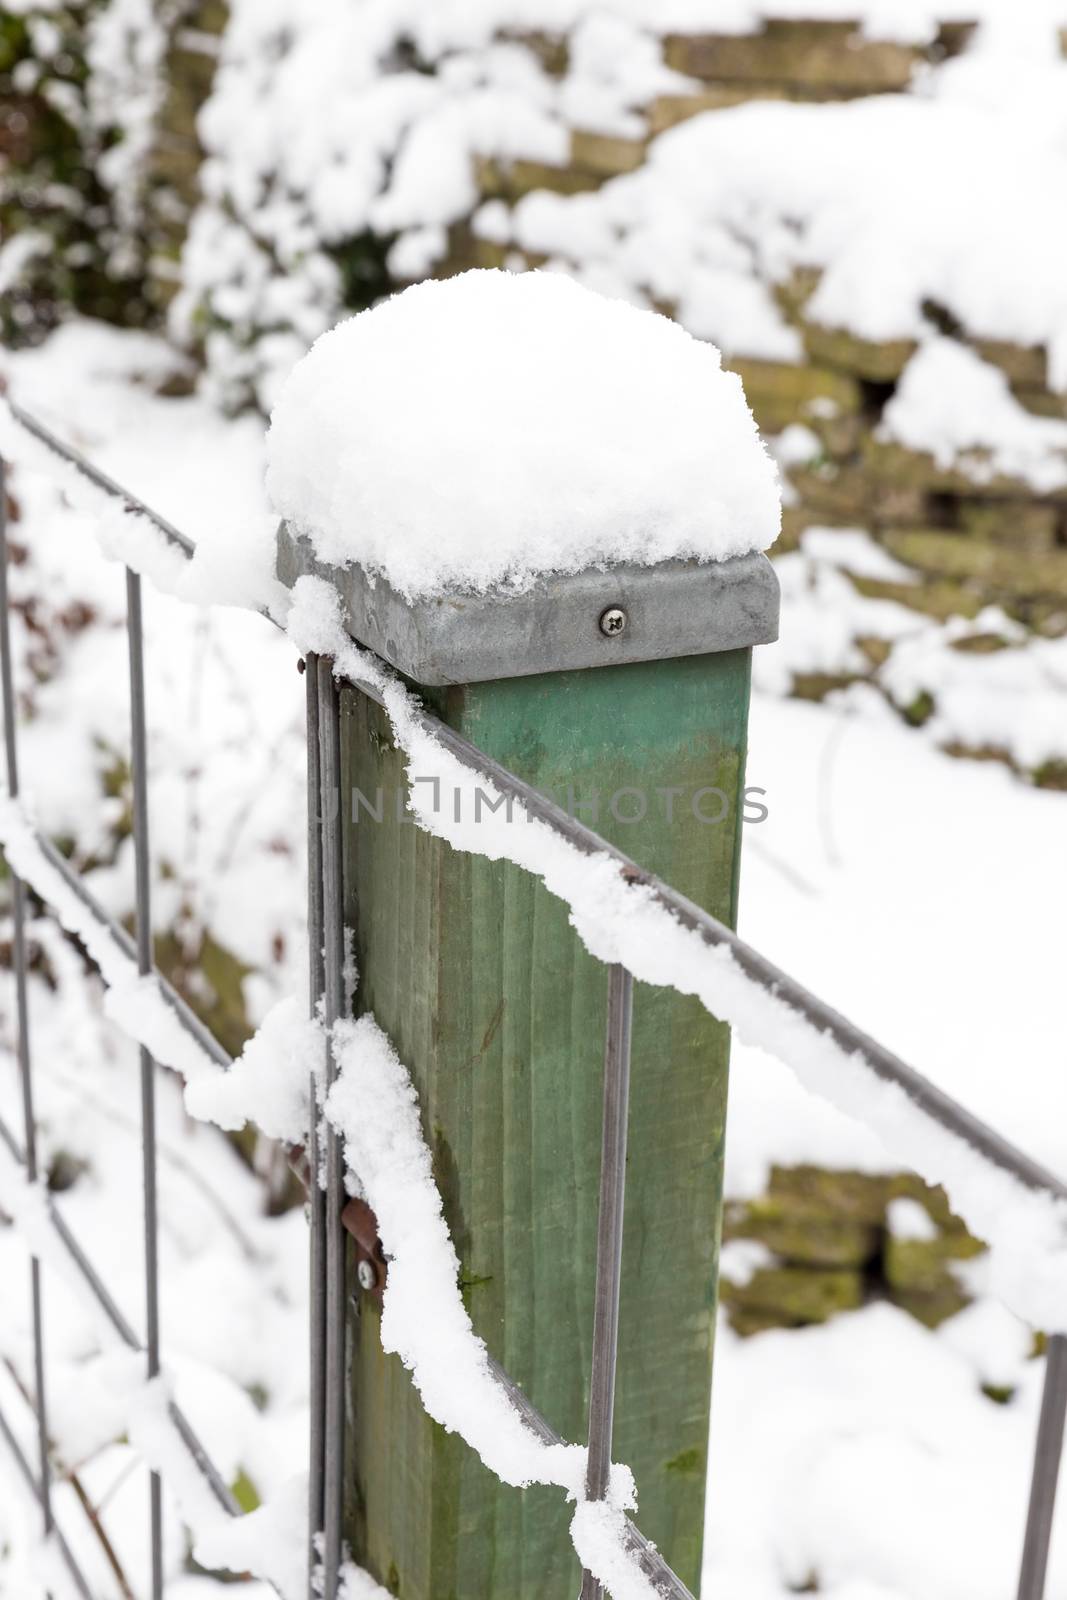 Snow on wooden pole and fence by BenSchonewille